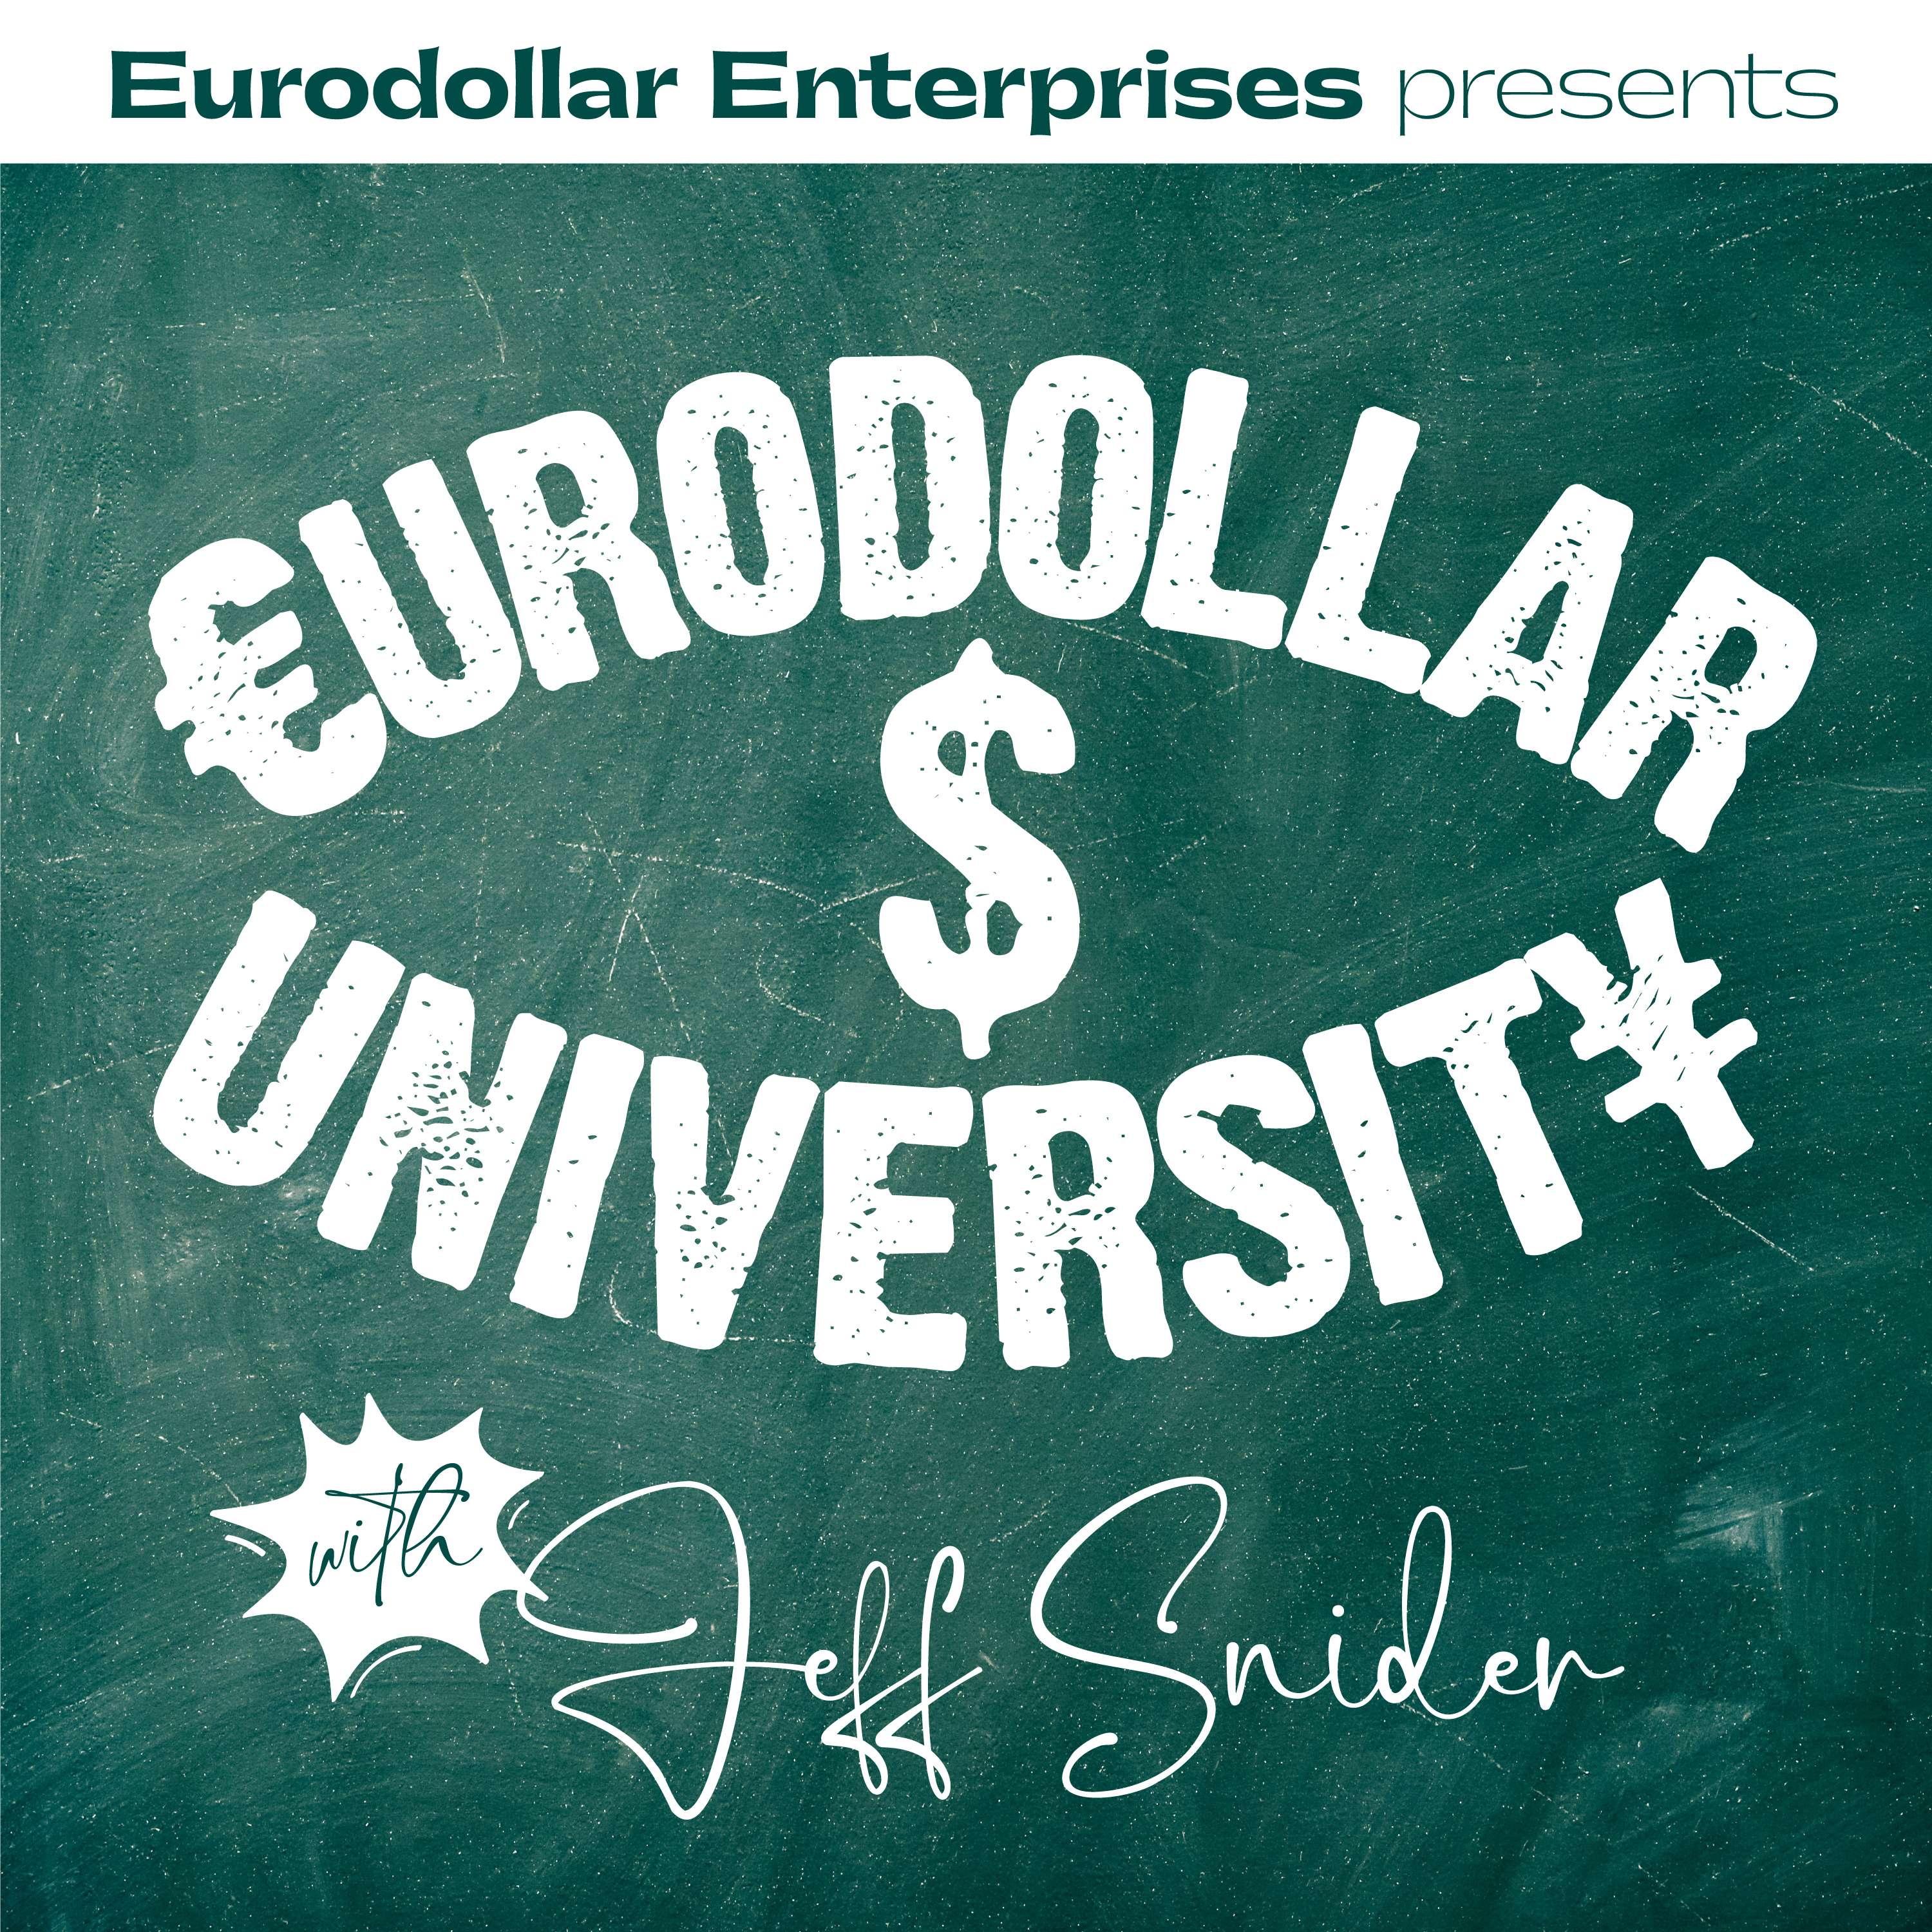 Curve Inversion Warning Confirmed by TriParty Repo Collateral [Eurodollar University, Ep. 205]